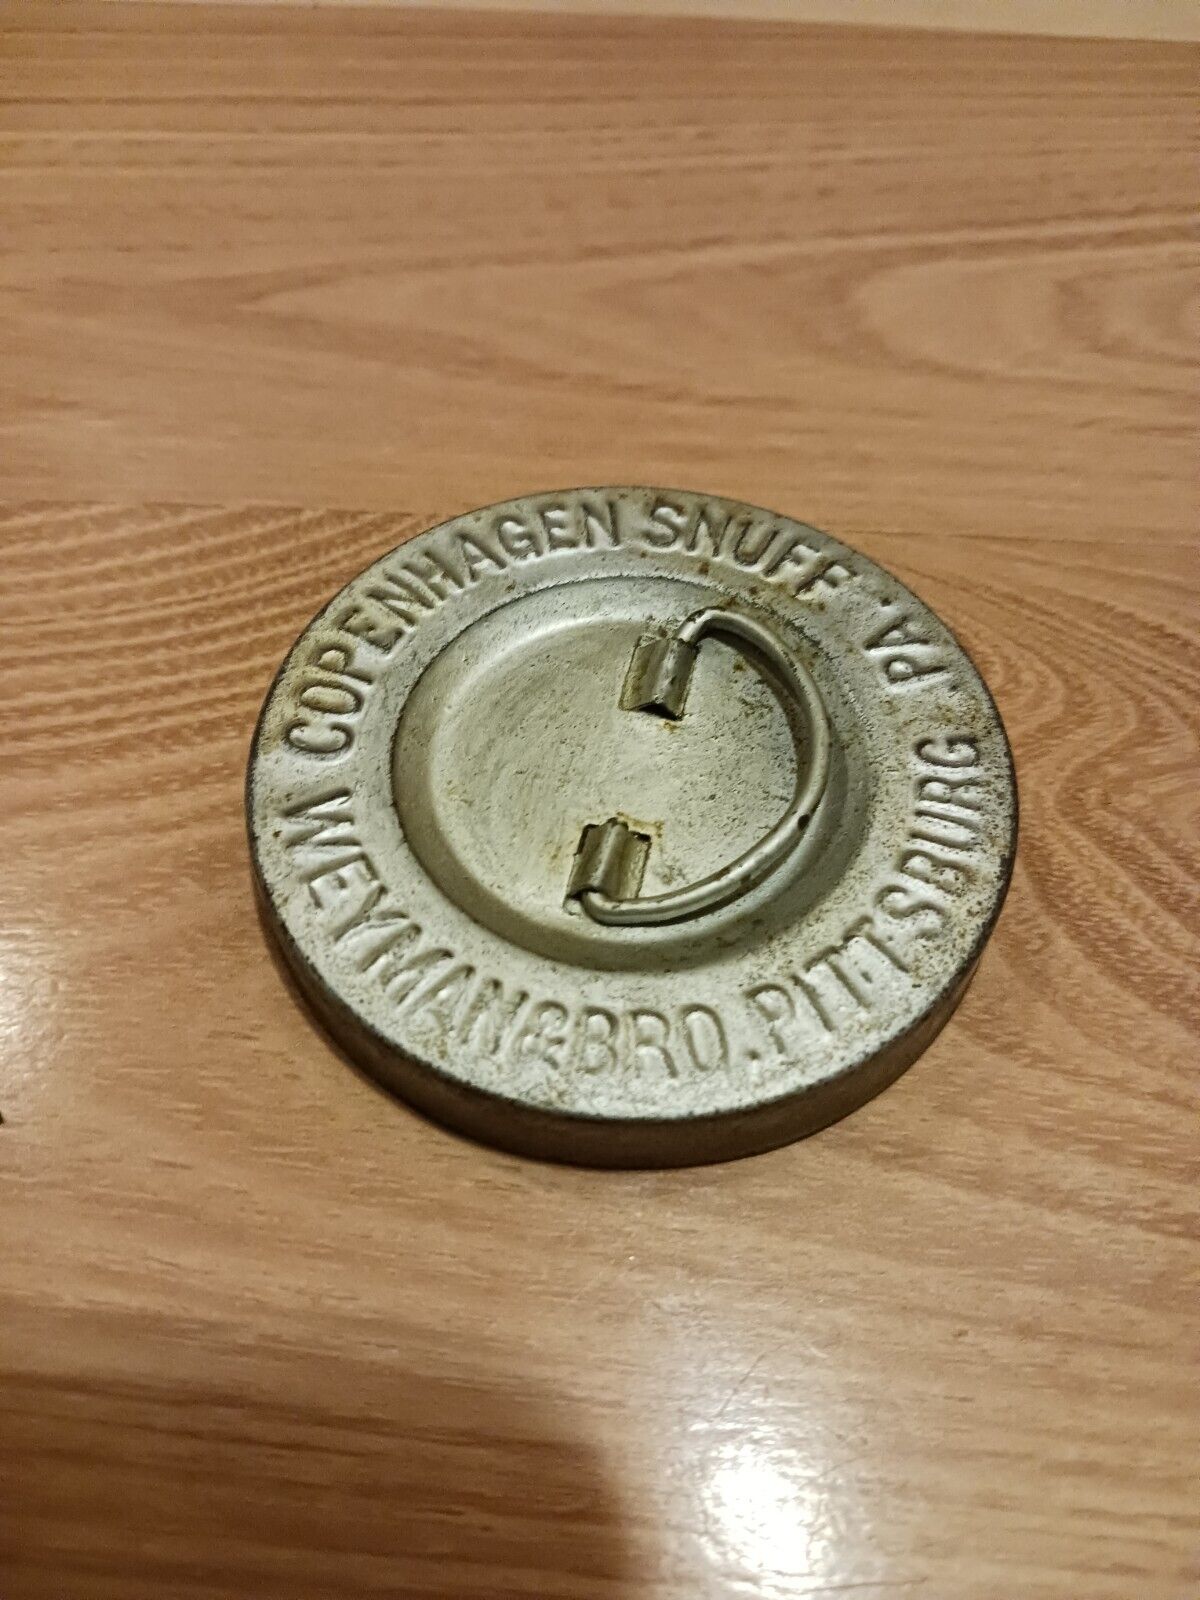 Rare very Hard to find  Early Copenhagen snuff metal lid made between 1870-1905